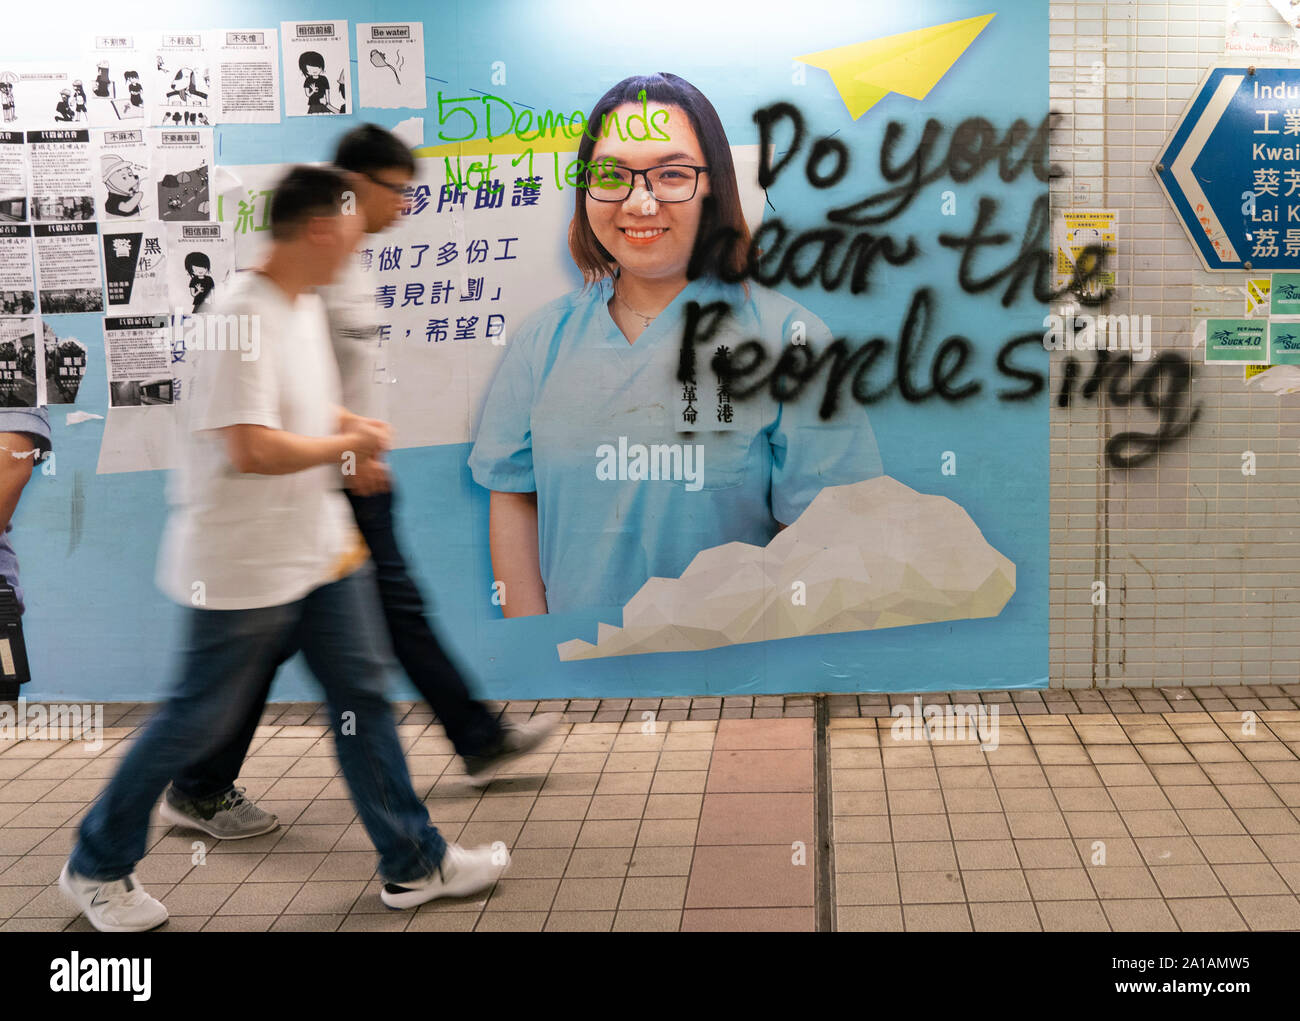 Pro democracy and anti extradition law protests, slogans and posters on Lennon Walls in Hong Kong. Pic Lennon Walls at Kwai Fong in New Territories. Stock Photo